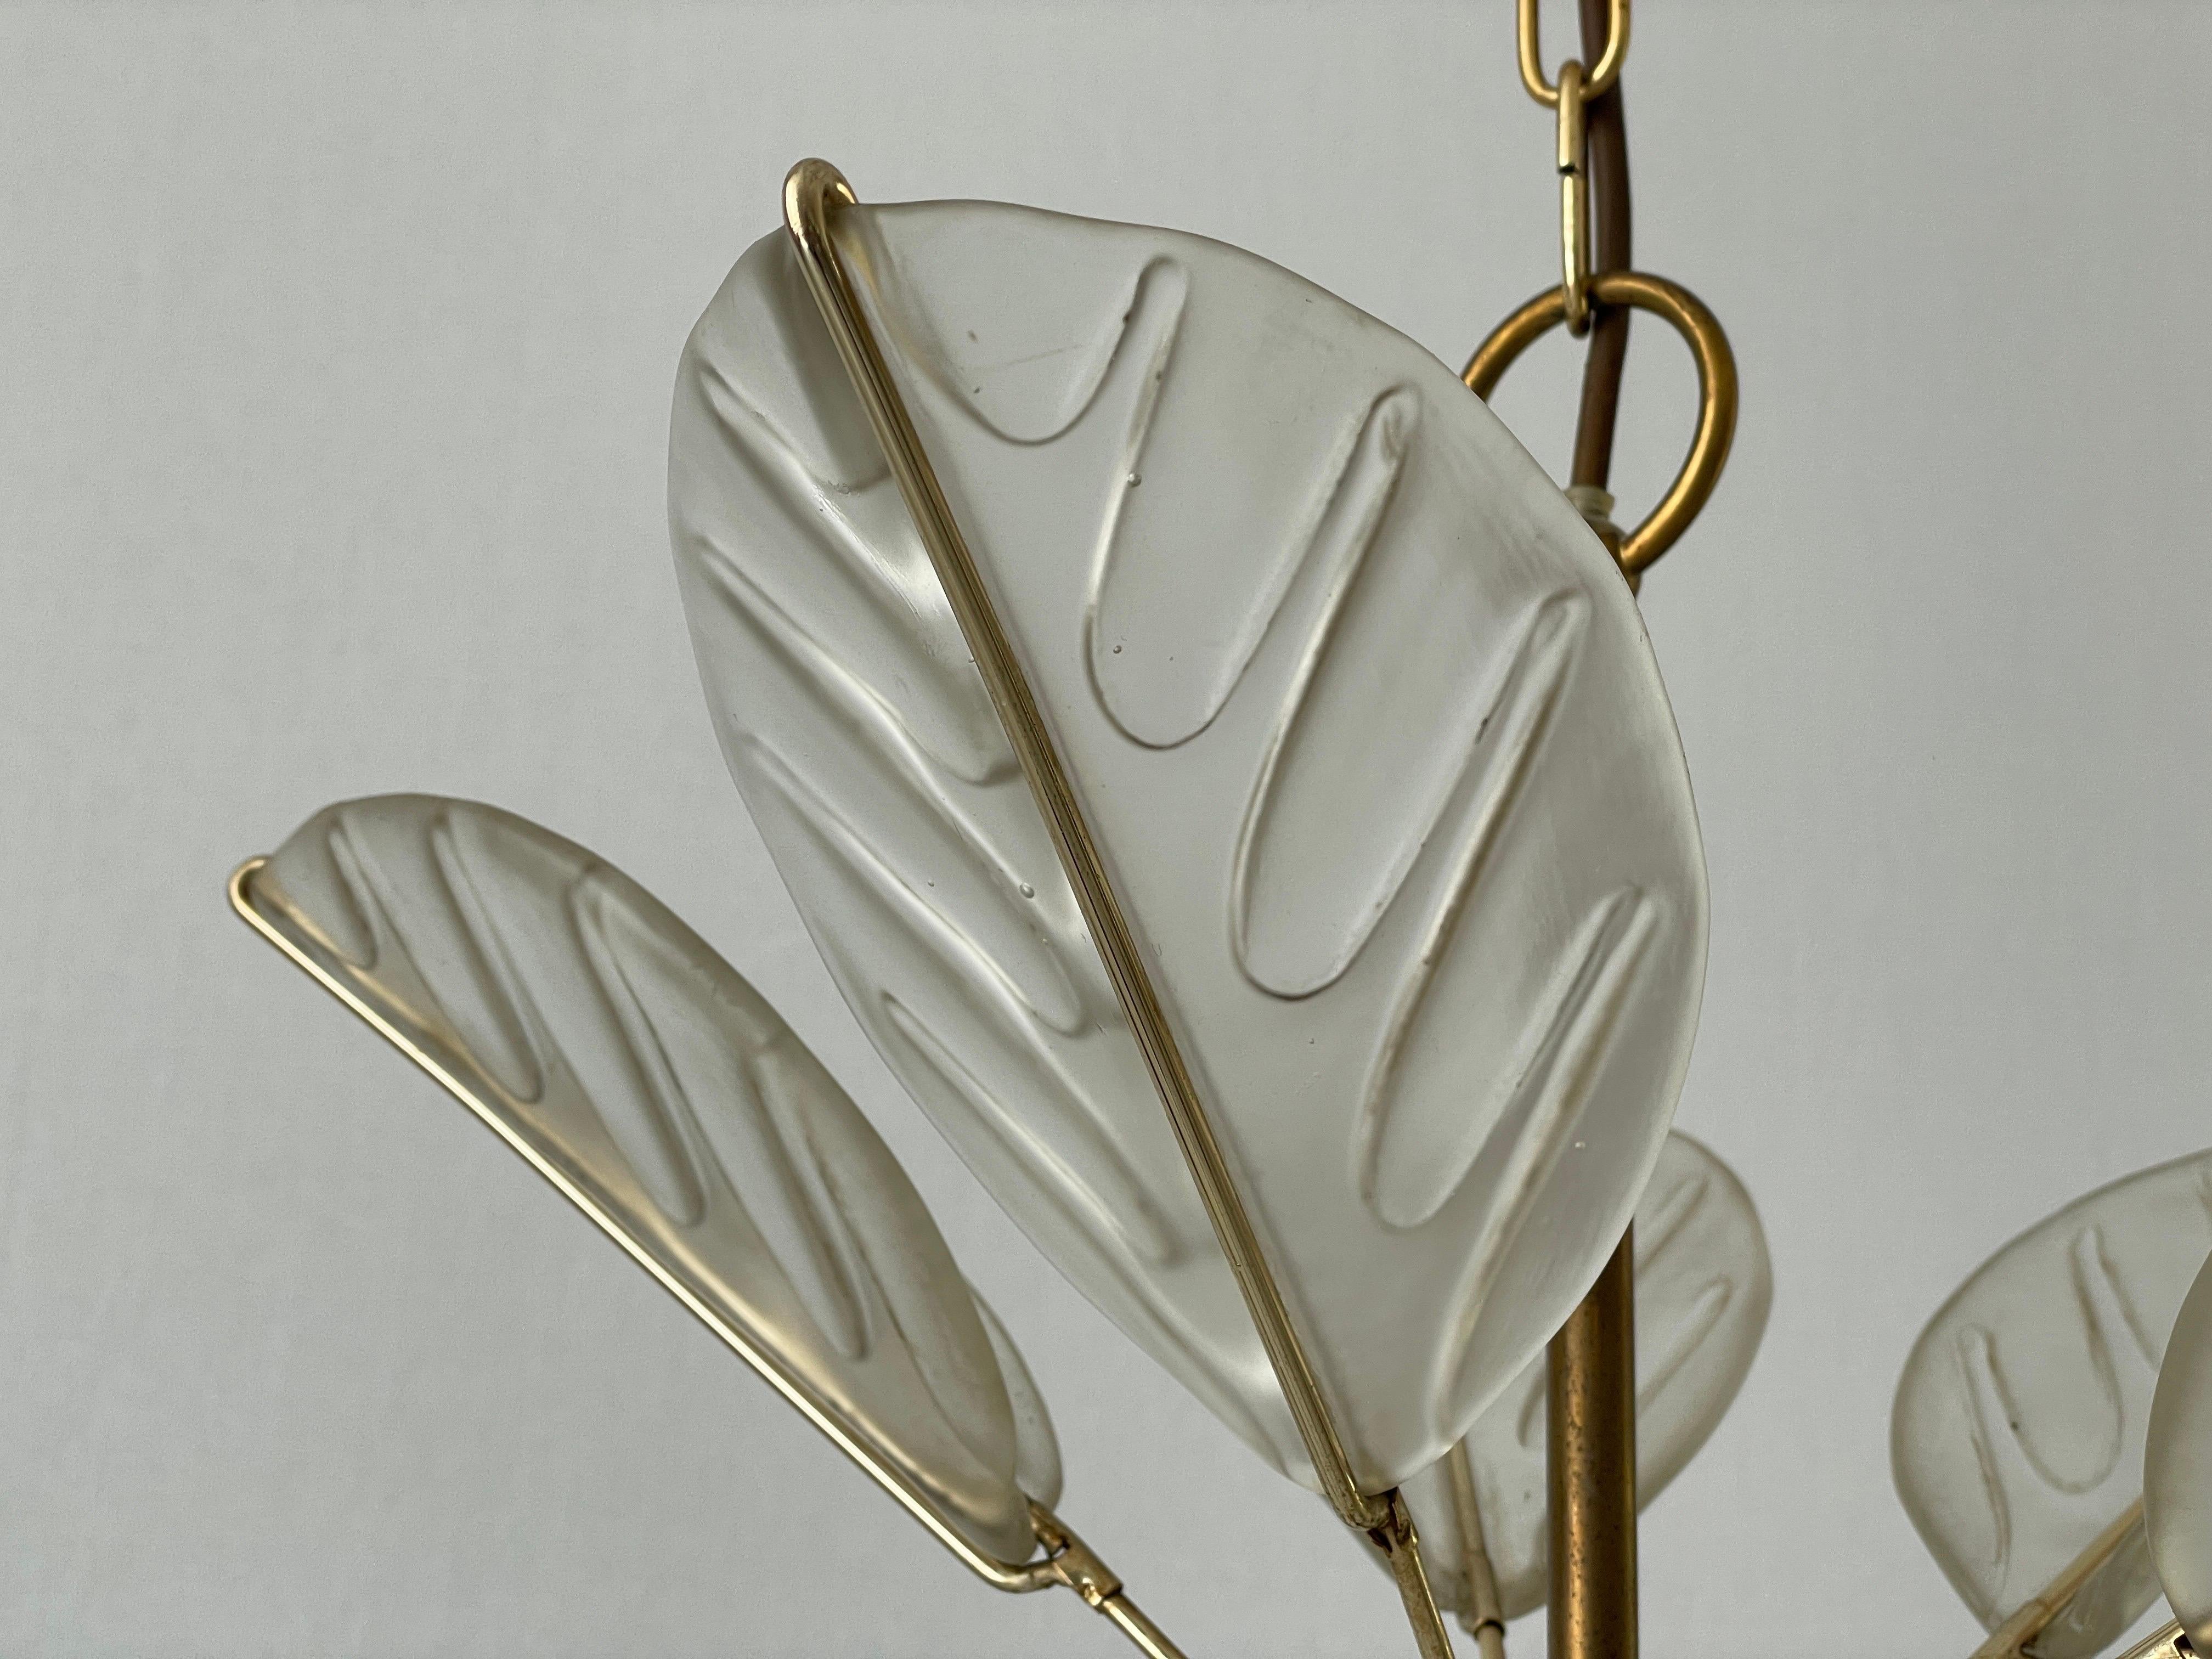 Luxurious 8-armed Brass Chandelier with Crystal Glass Leaves, 1960s, Germany For Sale 1